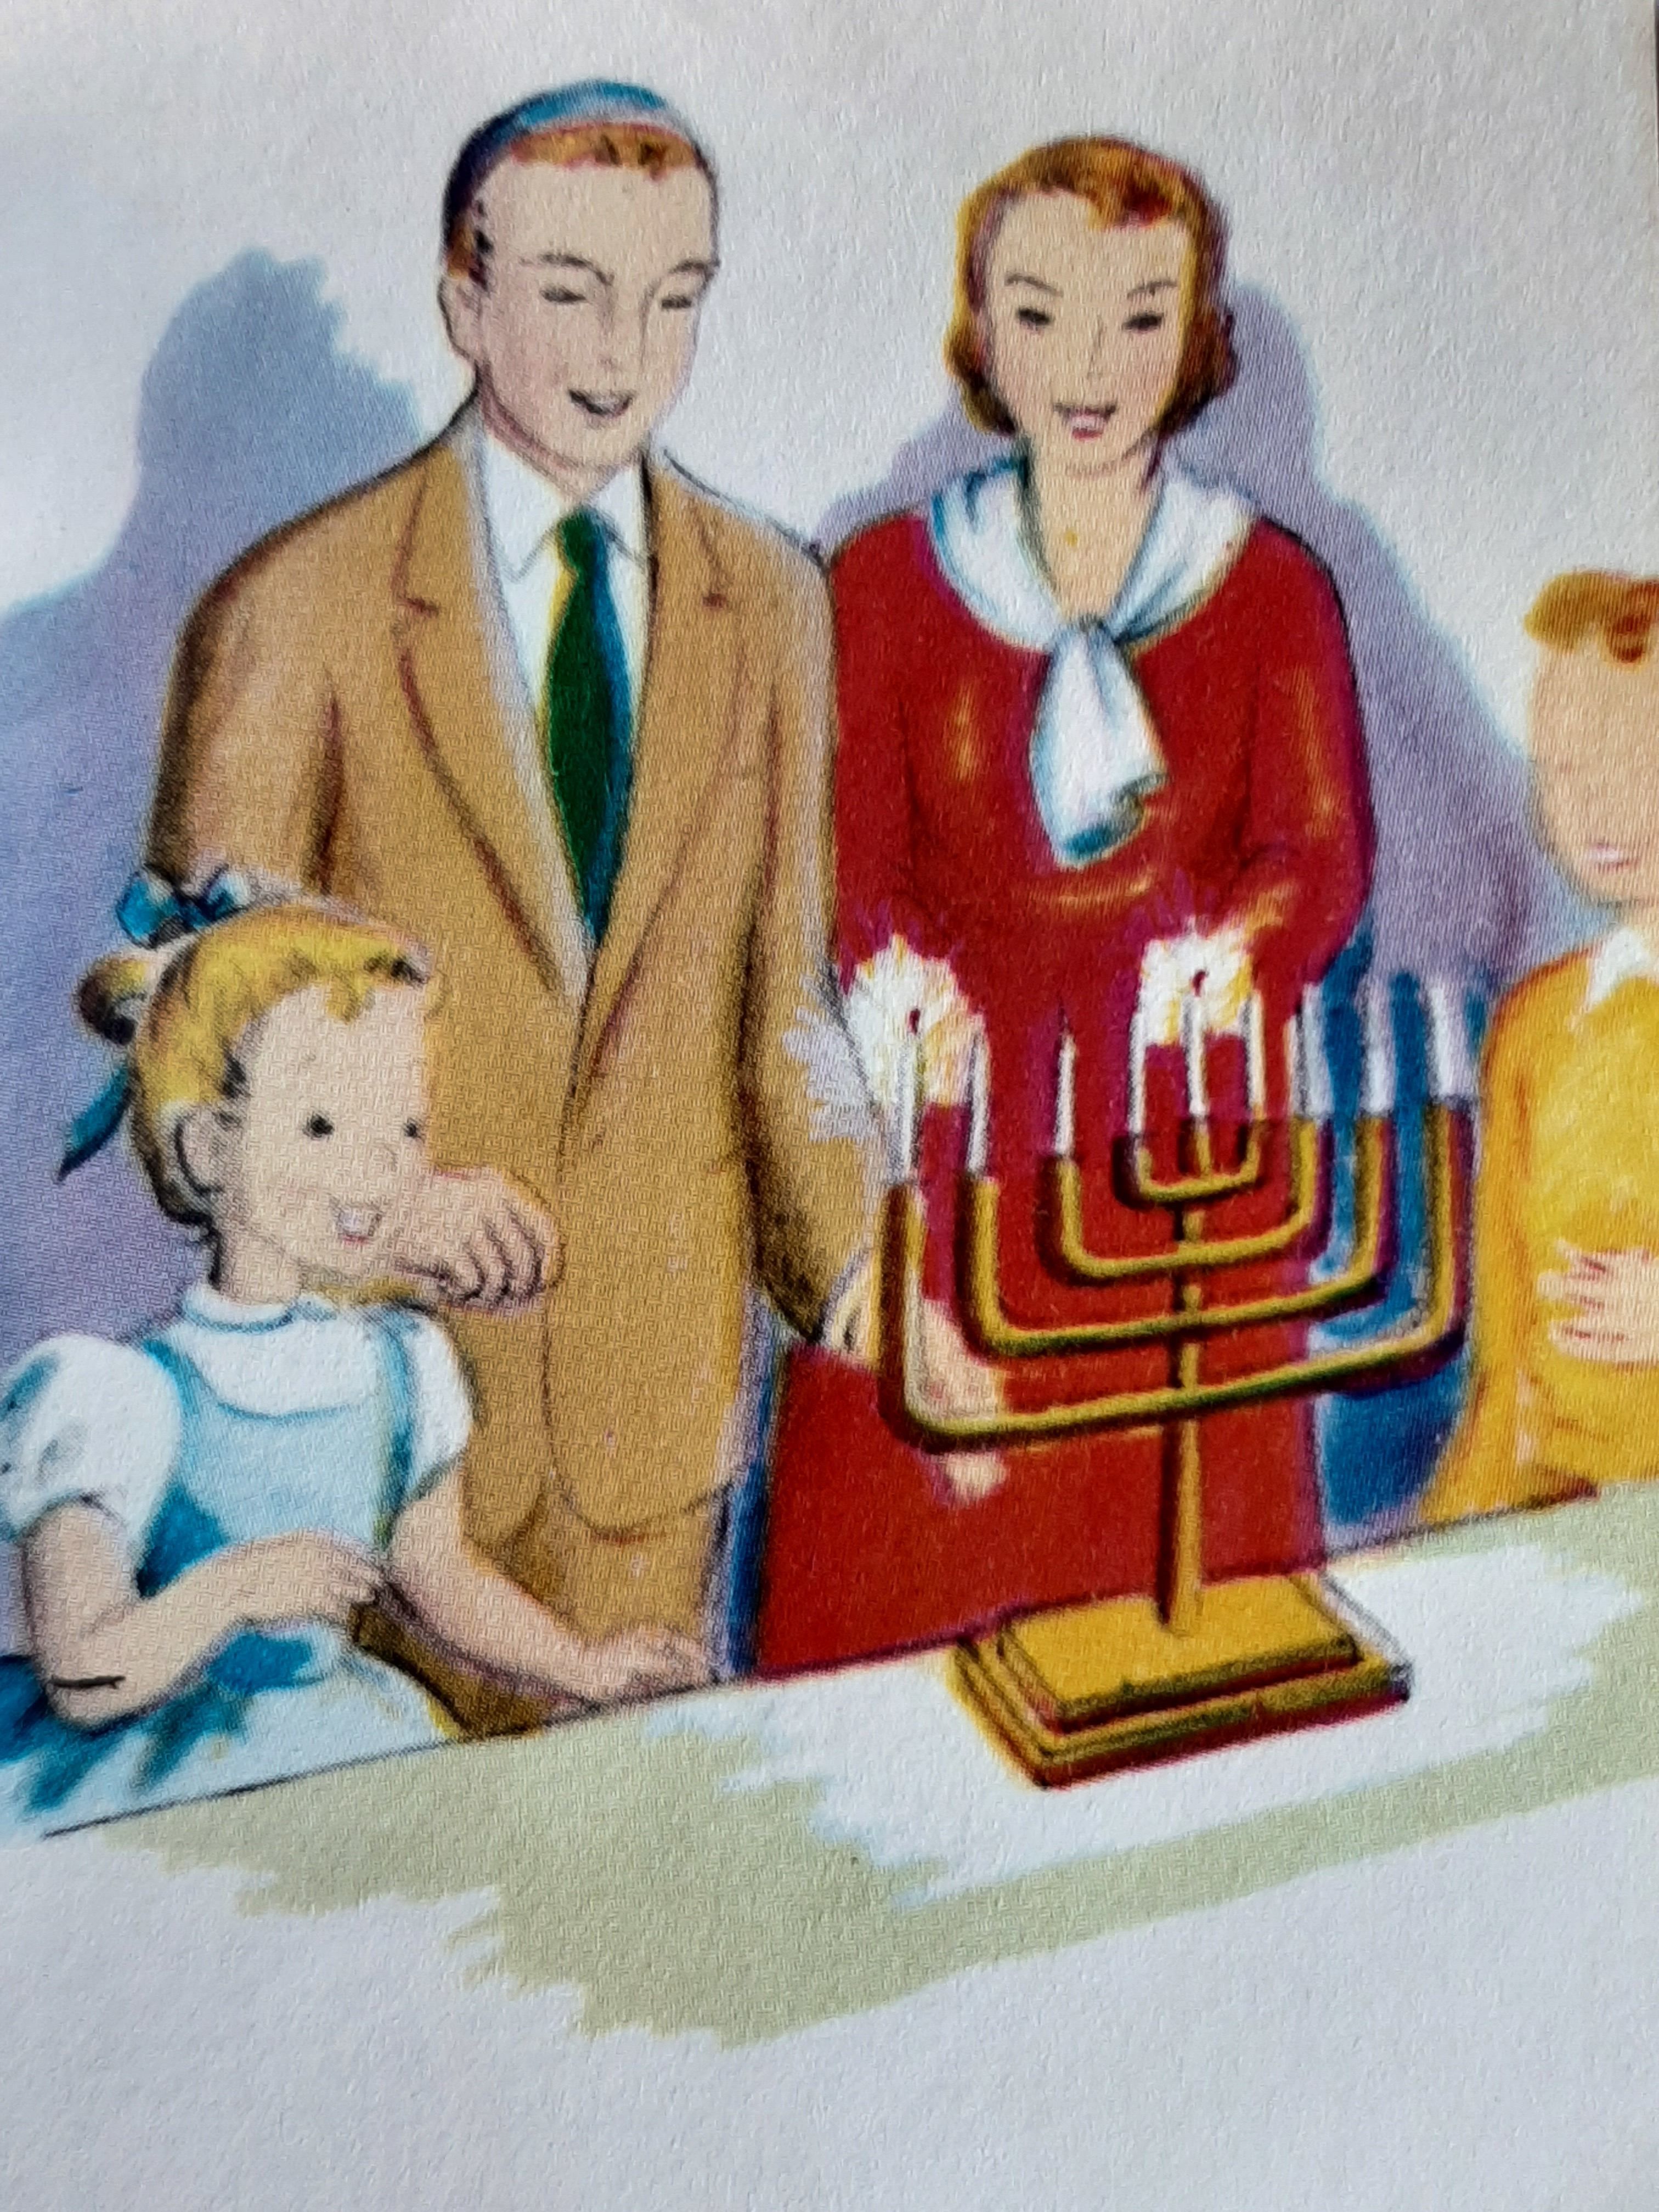 Hanukkah – the story of the Great Miracle